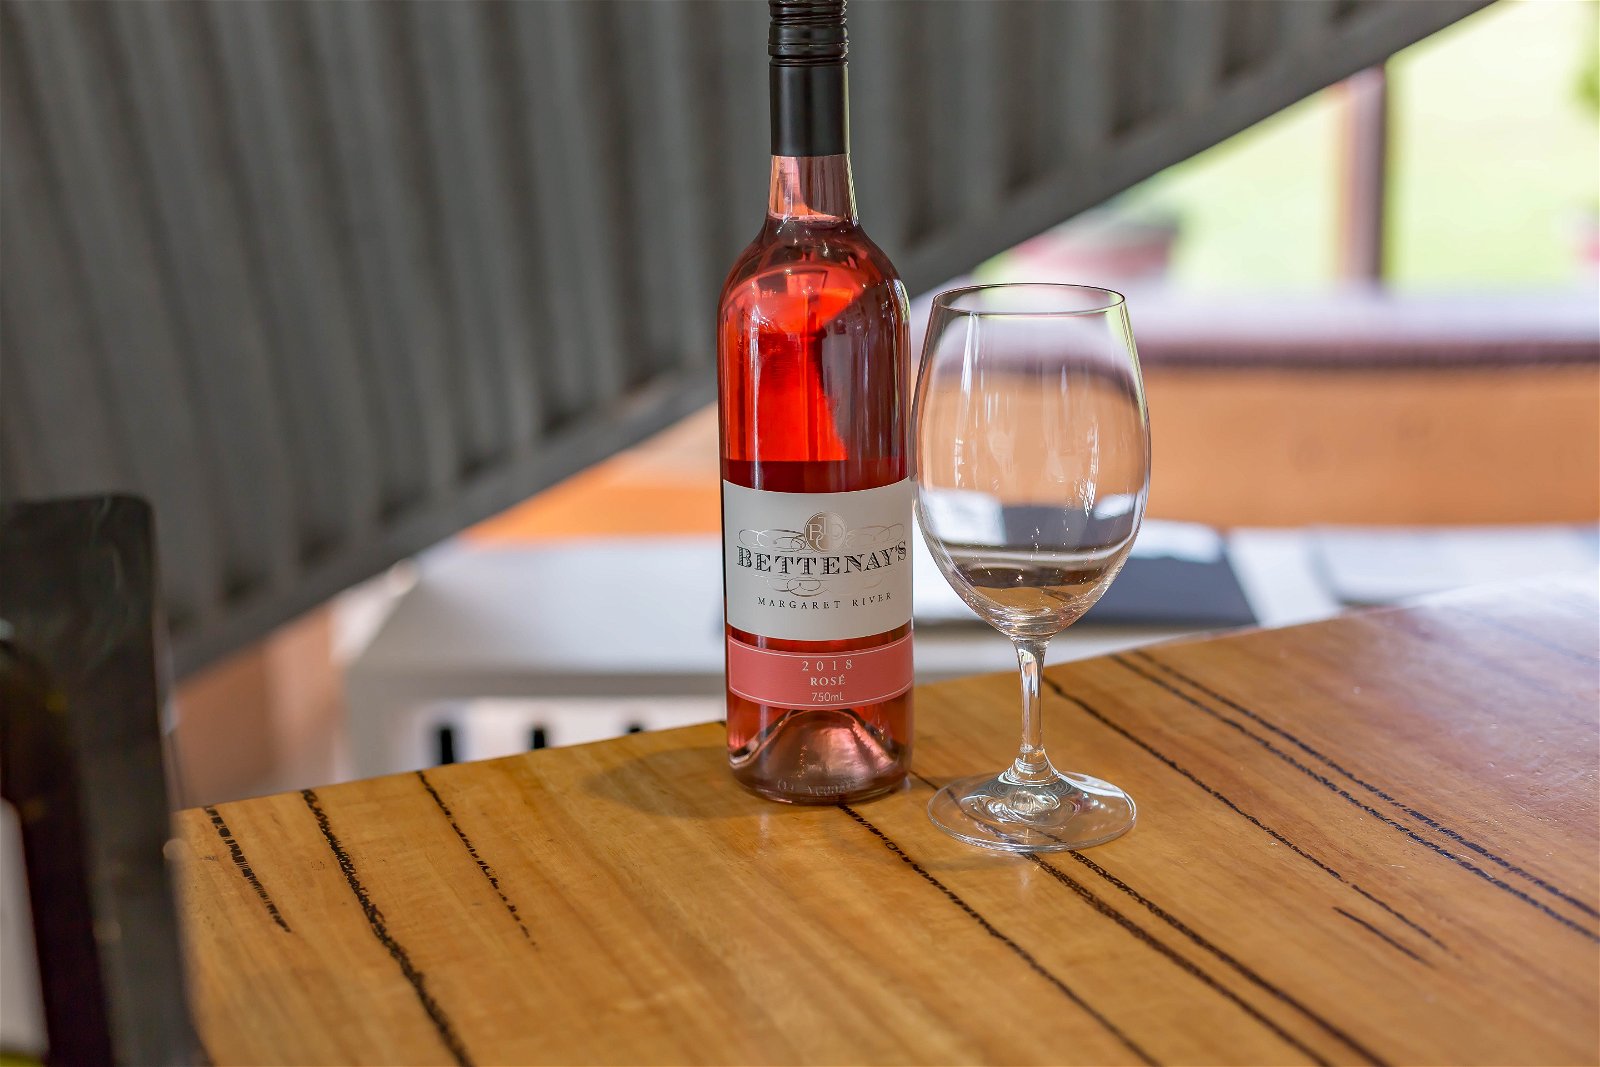 Bettenays Margaret River - Nougat and Wine - Northern Rivers Accommodation